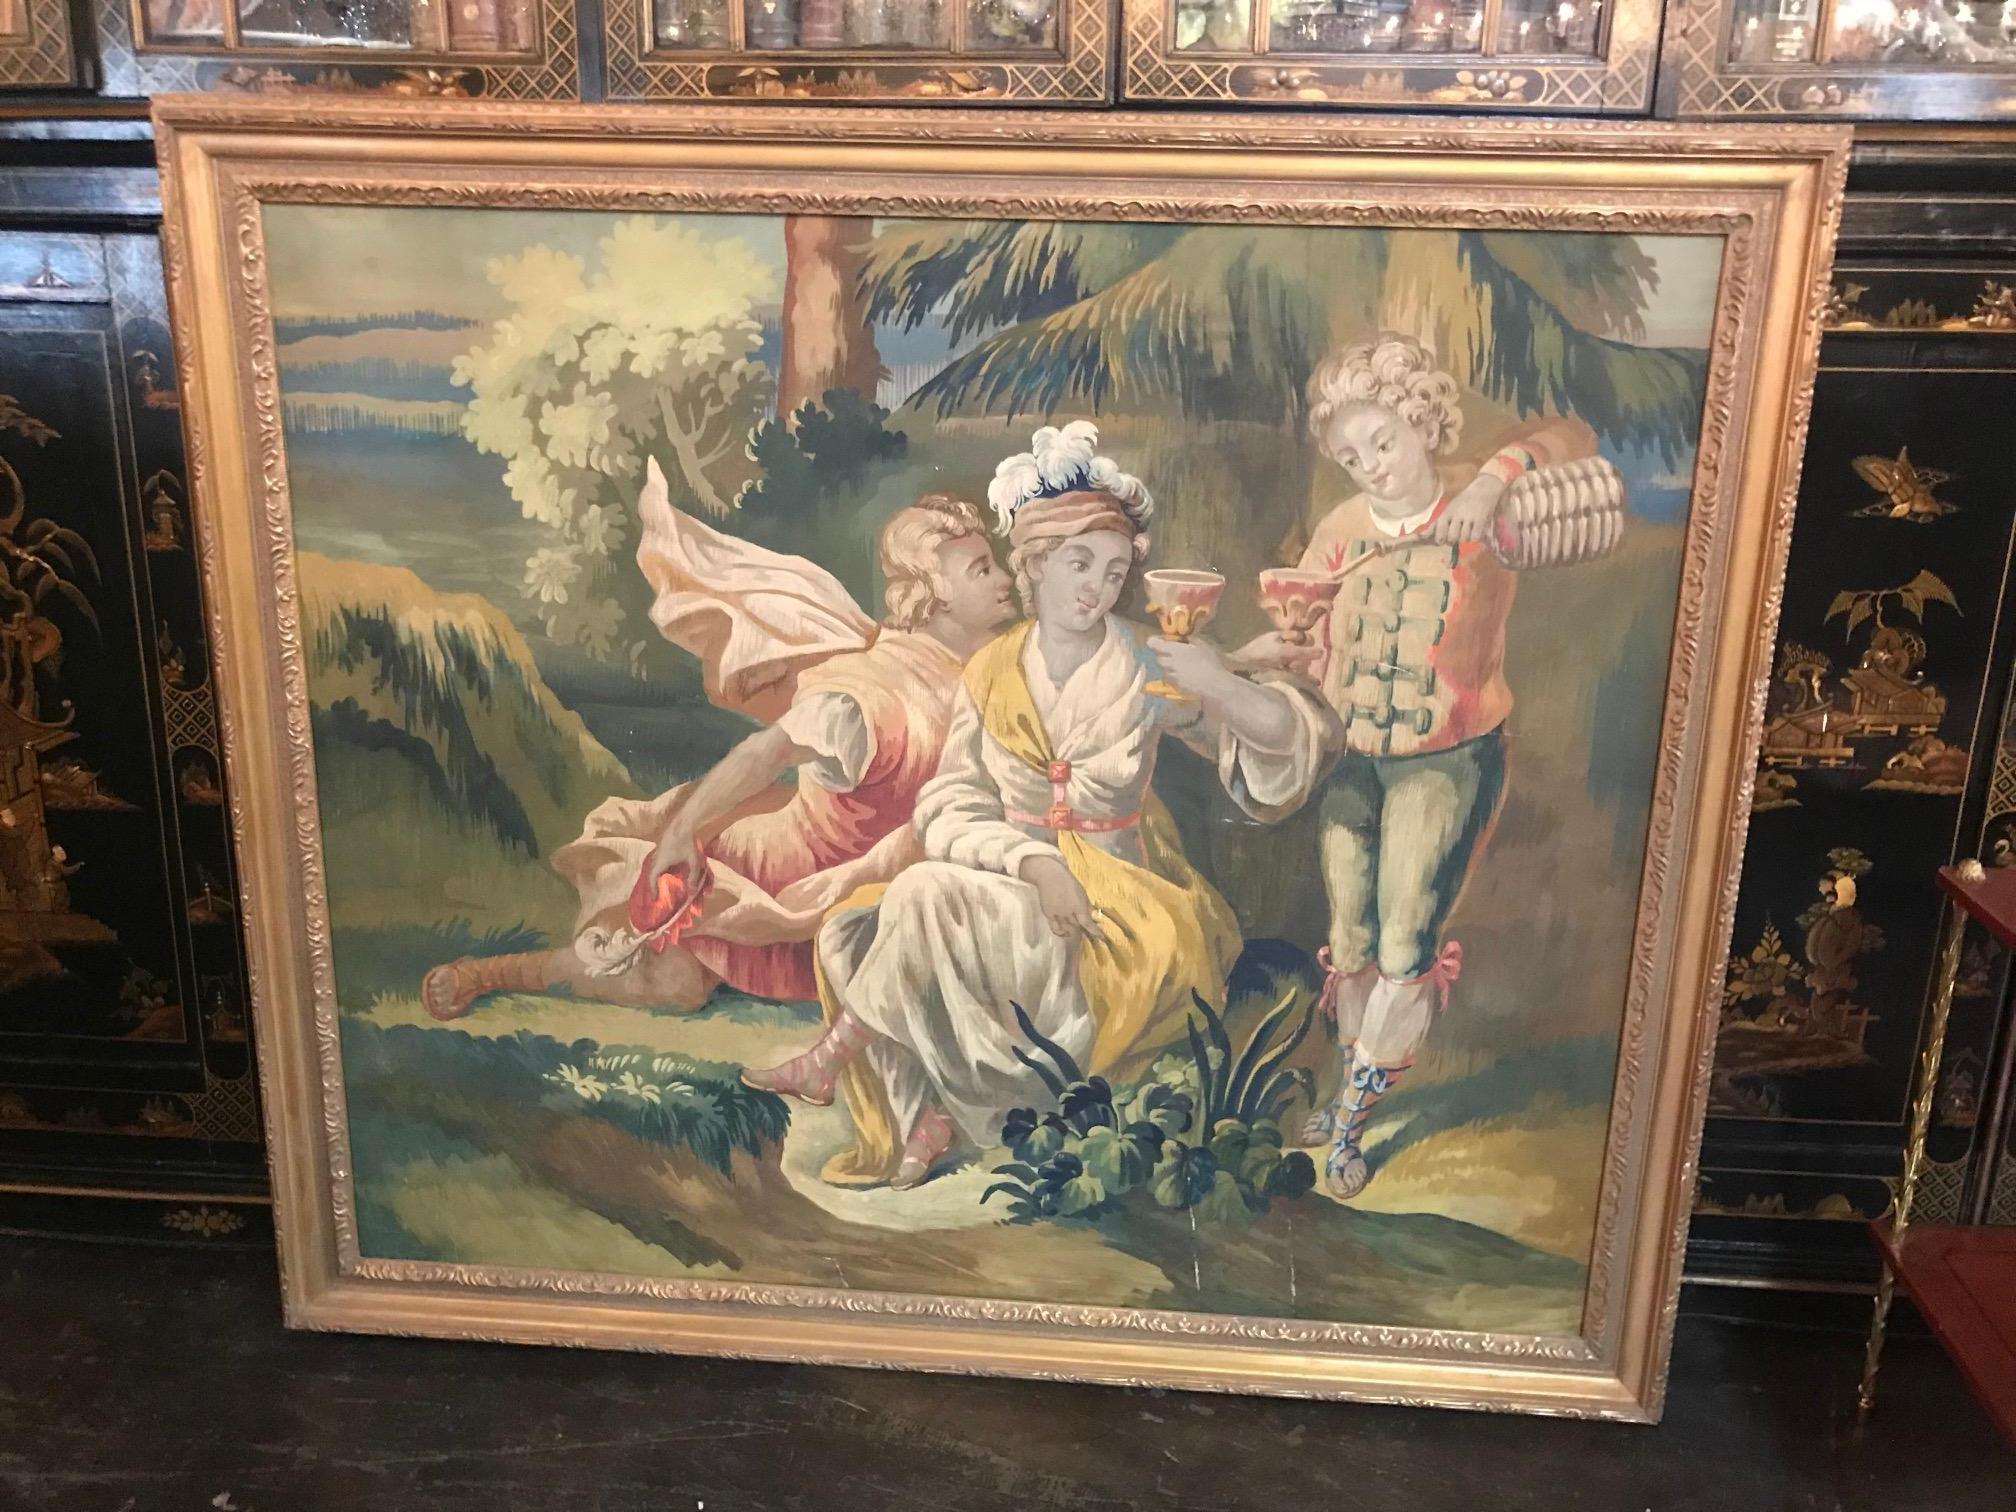 Fine quality 19th century French allegorical pastel on paper painting depicting a verdure landscape scene with paramours holding chalices as an attendant pours le vin. All dressed in 19th century French costume. Vivid colors and superb